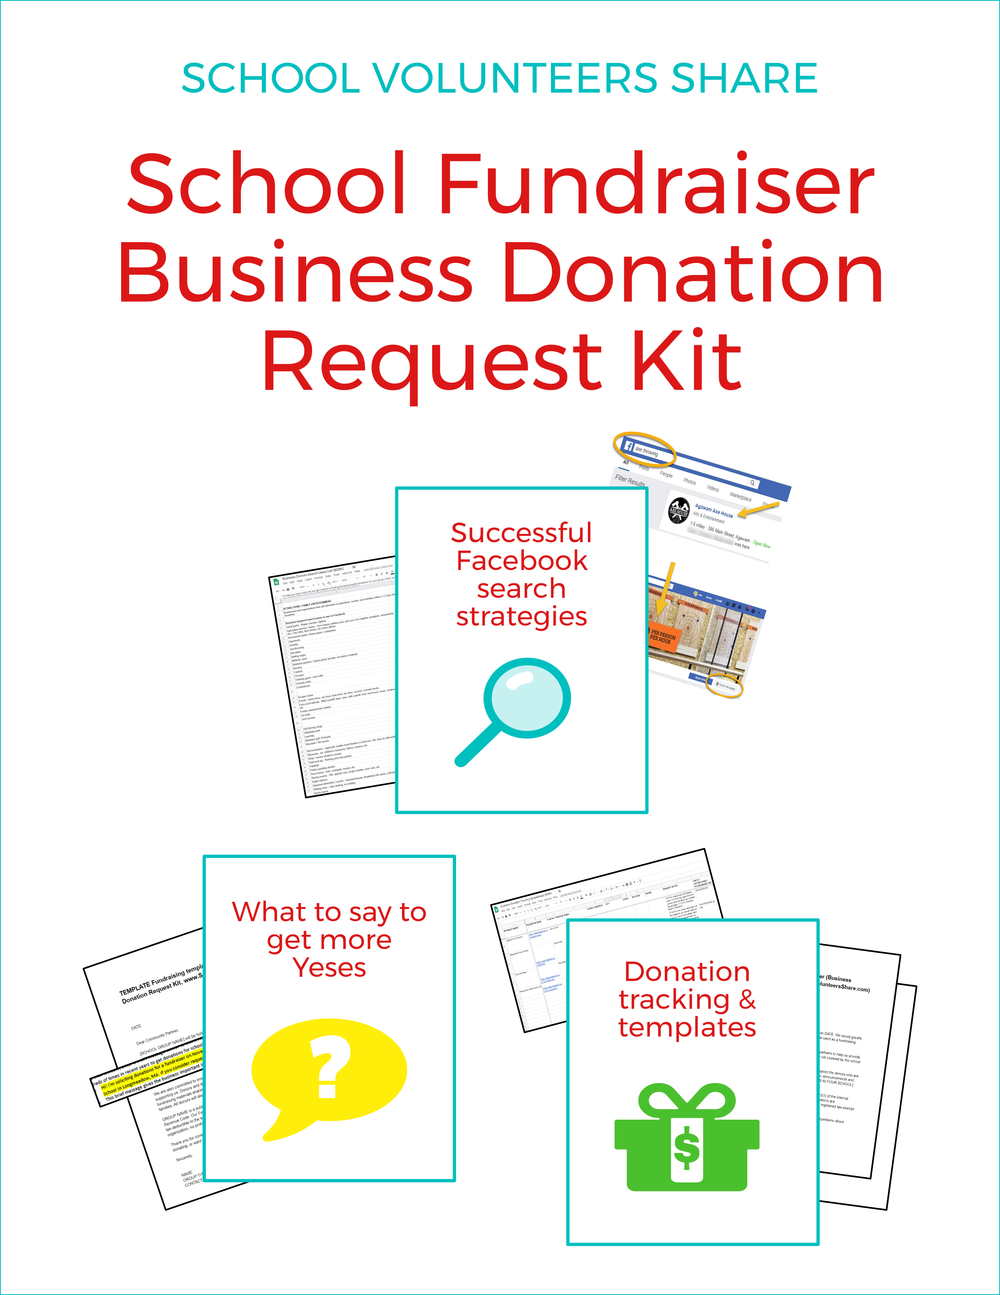 How To Get Donations From Local Businesses For School Fundraisers Using Facebook School Volunteers Share